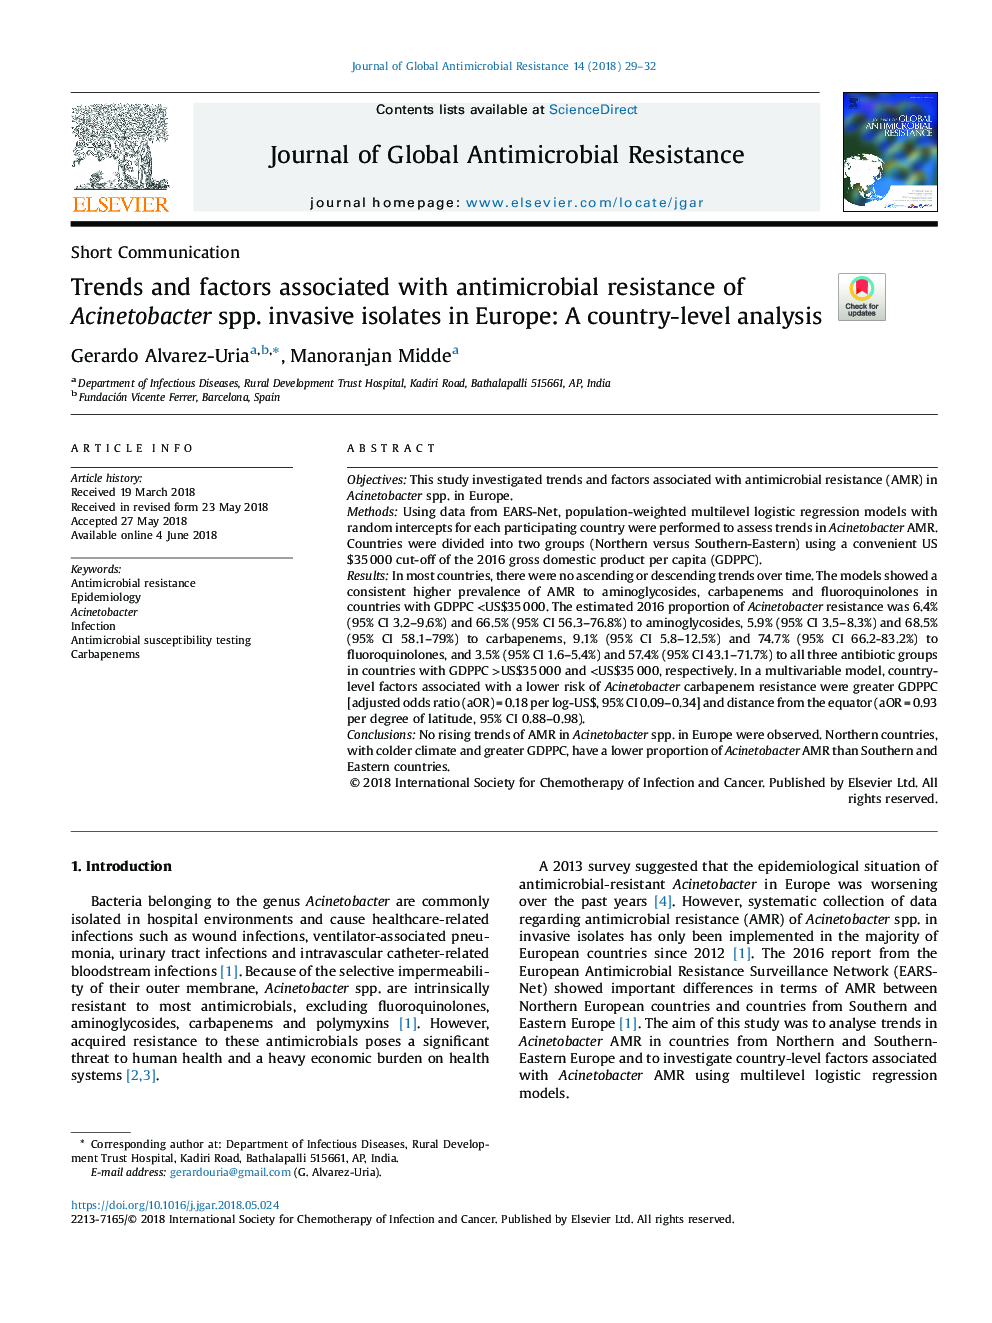 Trends and factors associated with antimicrobial resistance of Acinetobacter spp. invasive isolates in Europe: A country-level analysis